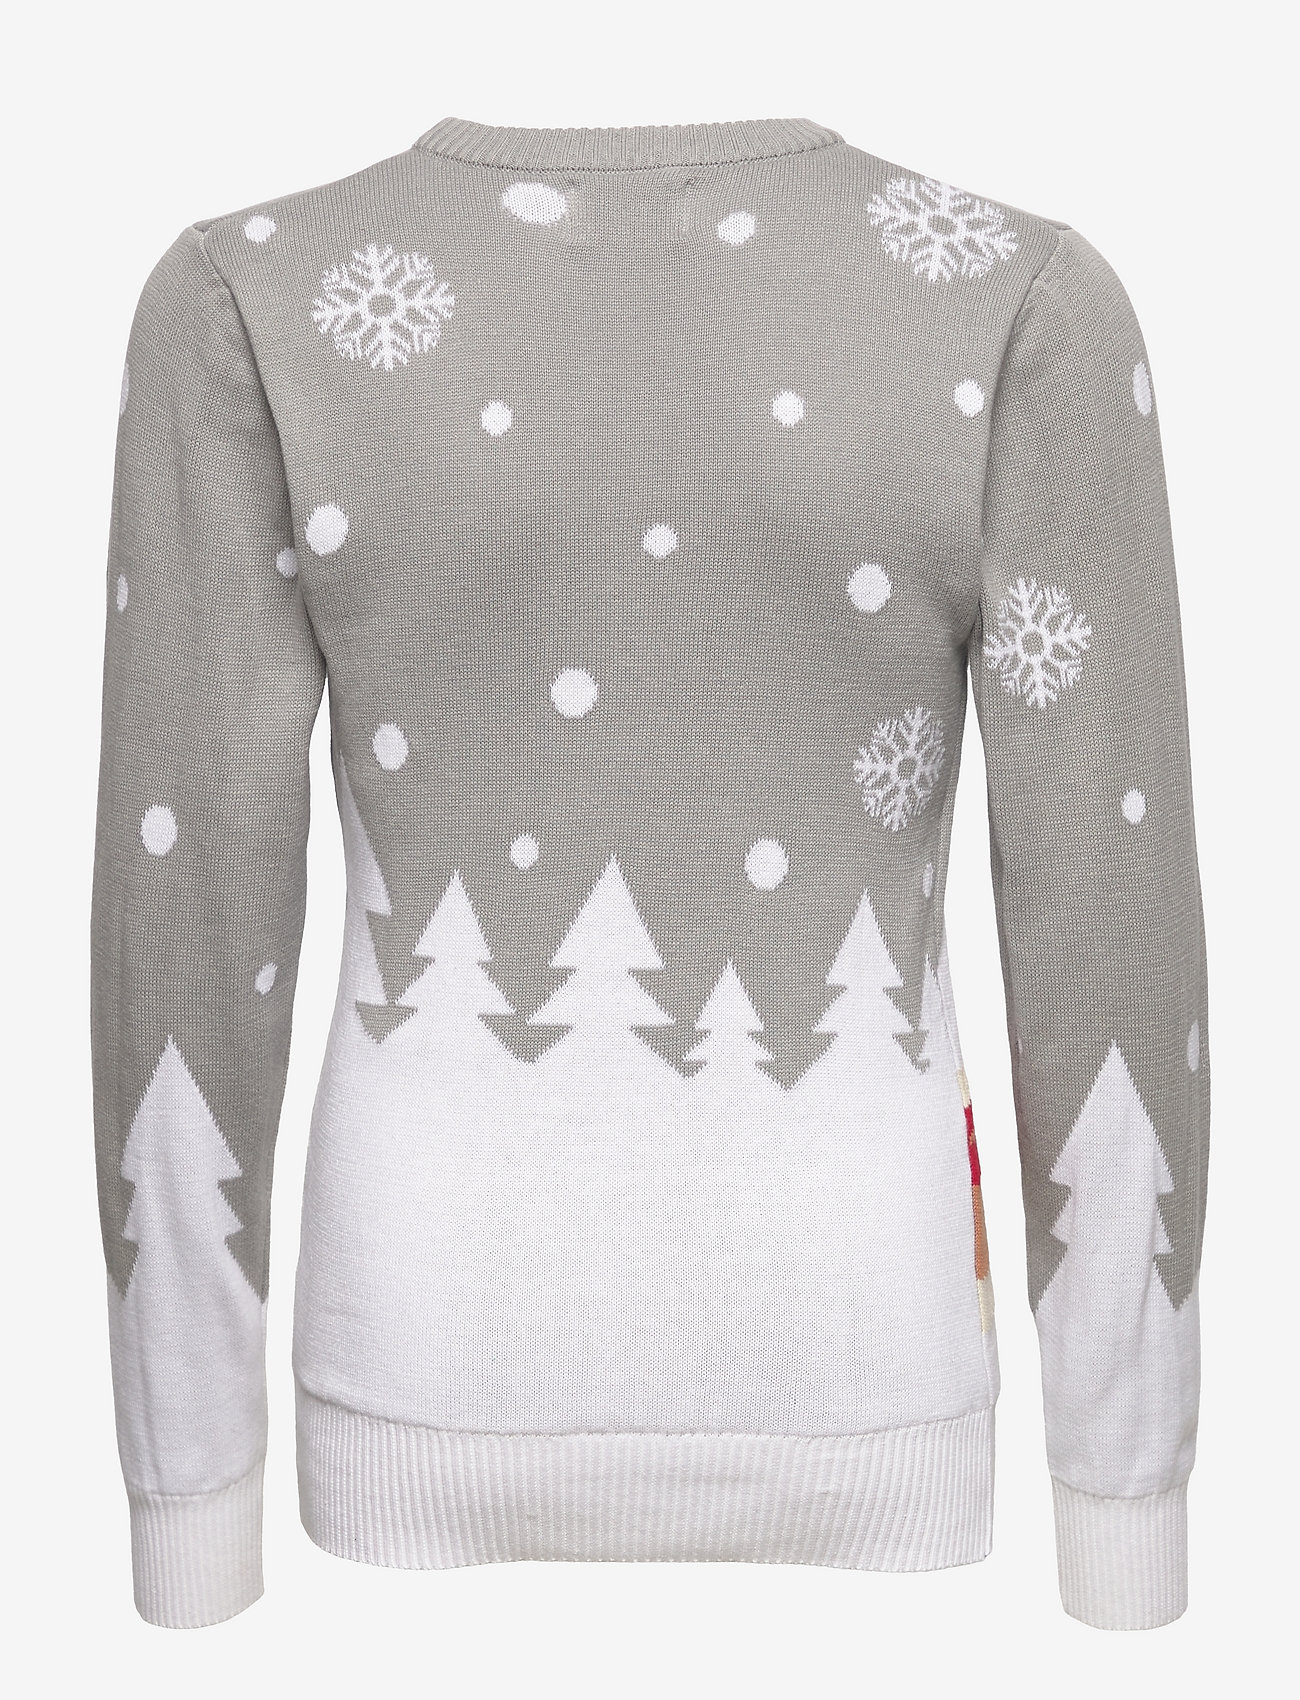 Christmas Sweats - The Cute sweater - jumpers - grey - 1